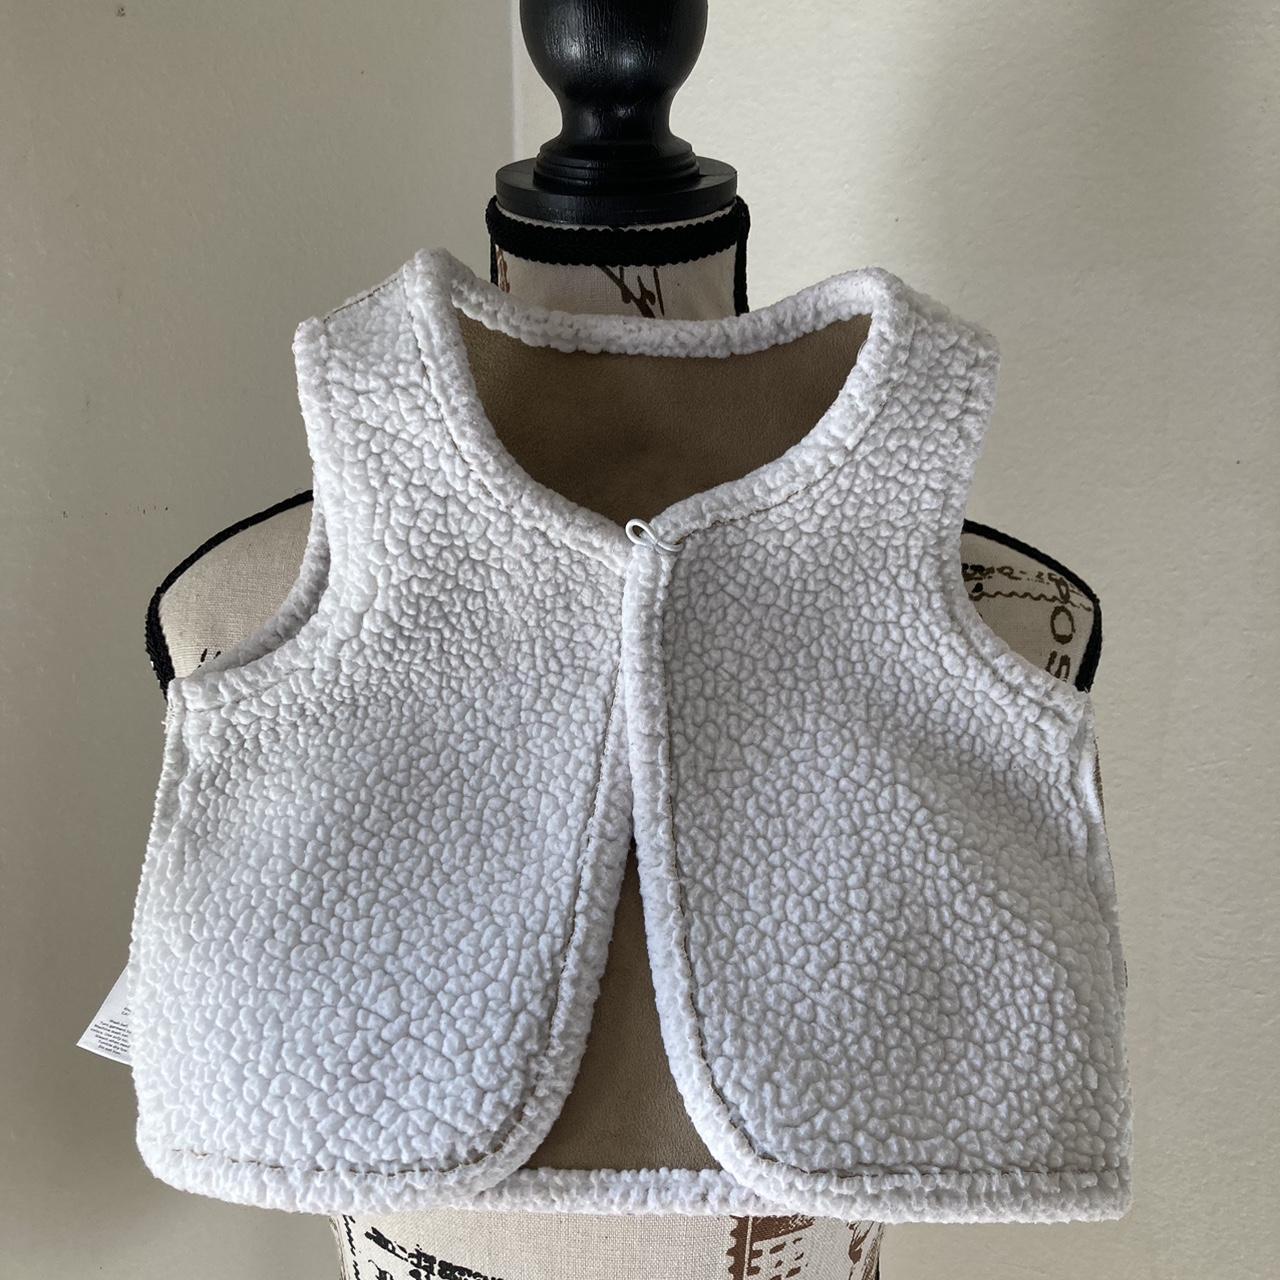 Carter's Tan and White Gilet (3)